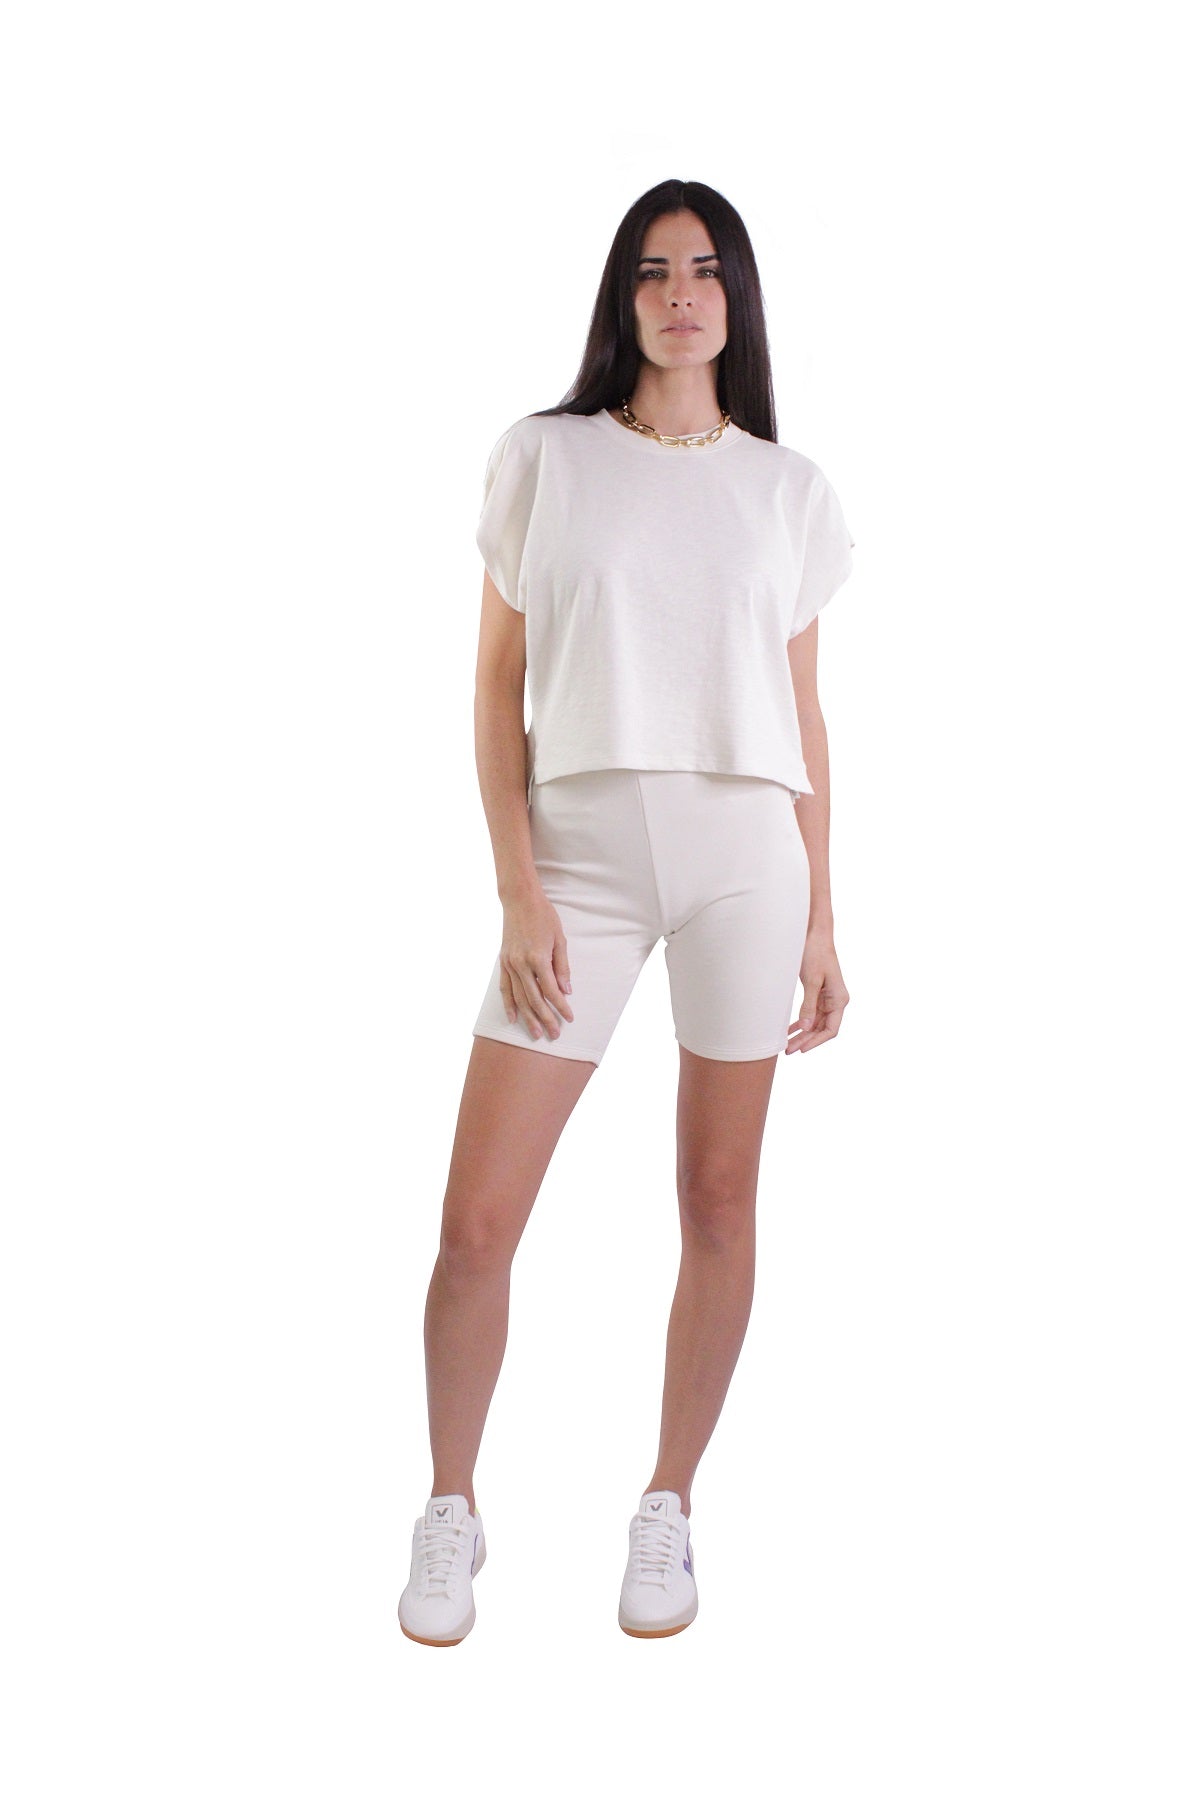 tryk Northern Fahrenheit Off Duty Tee Top in Whisper White